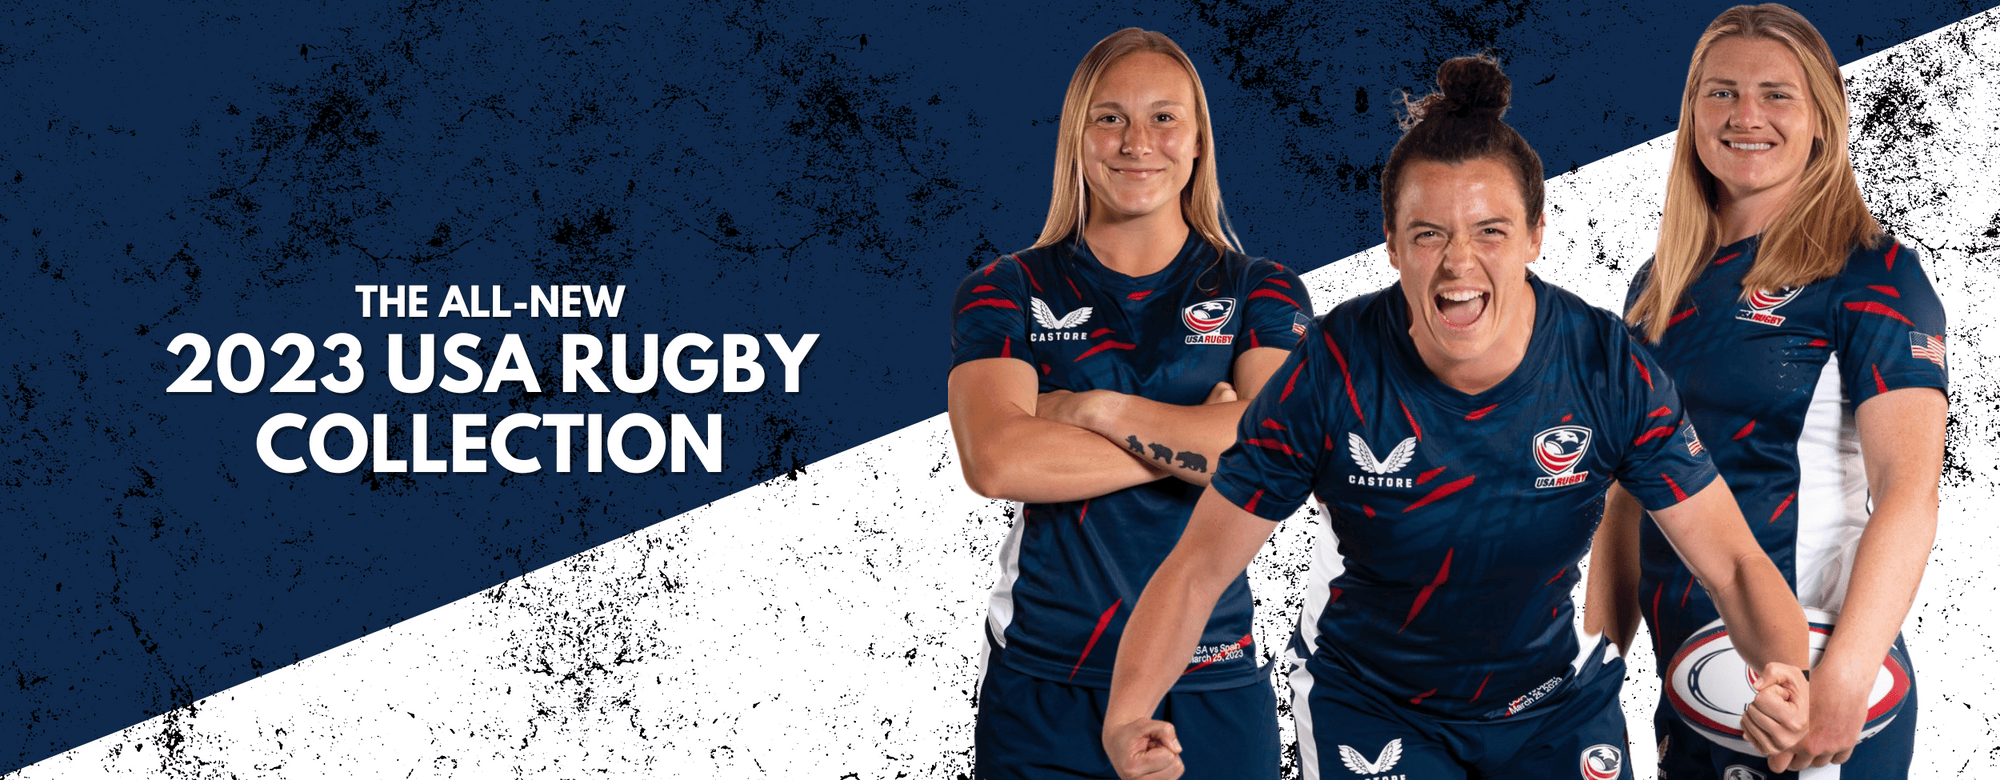 USA Rugby Collection 2023